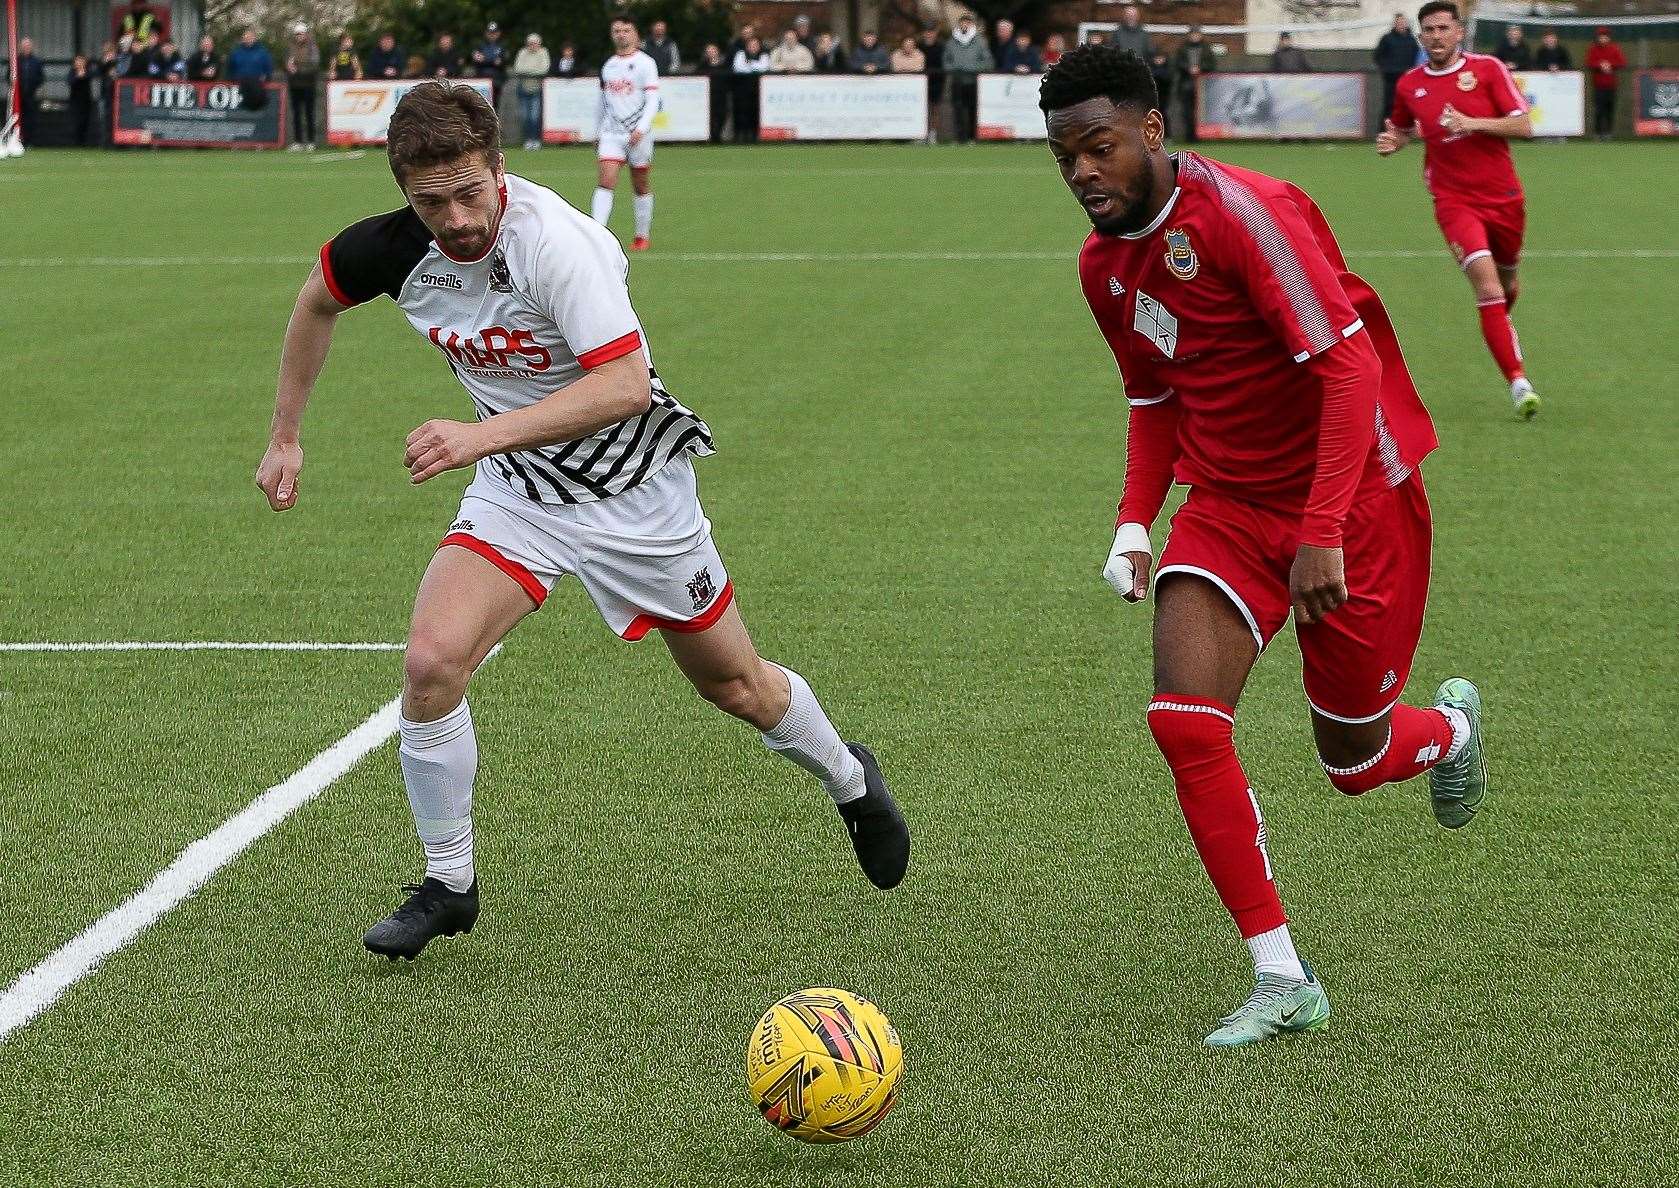 Whitstable man-of-the-match Josh Williams speeds down the wing as he gets past Deal's Billy Munday. Picture: Les Biggs